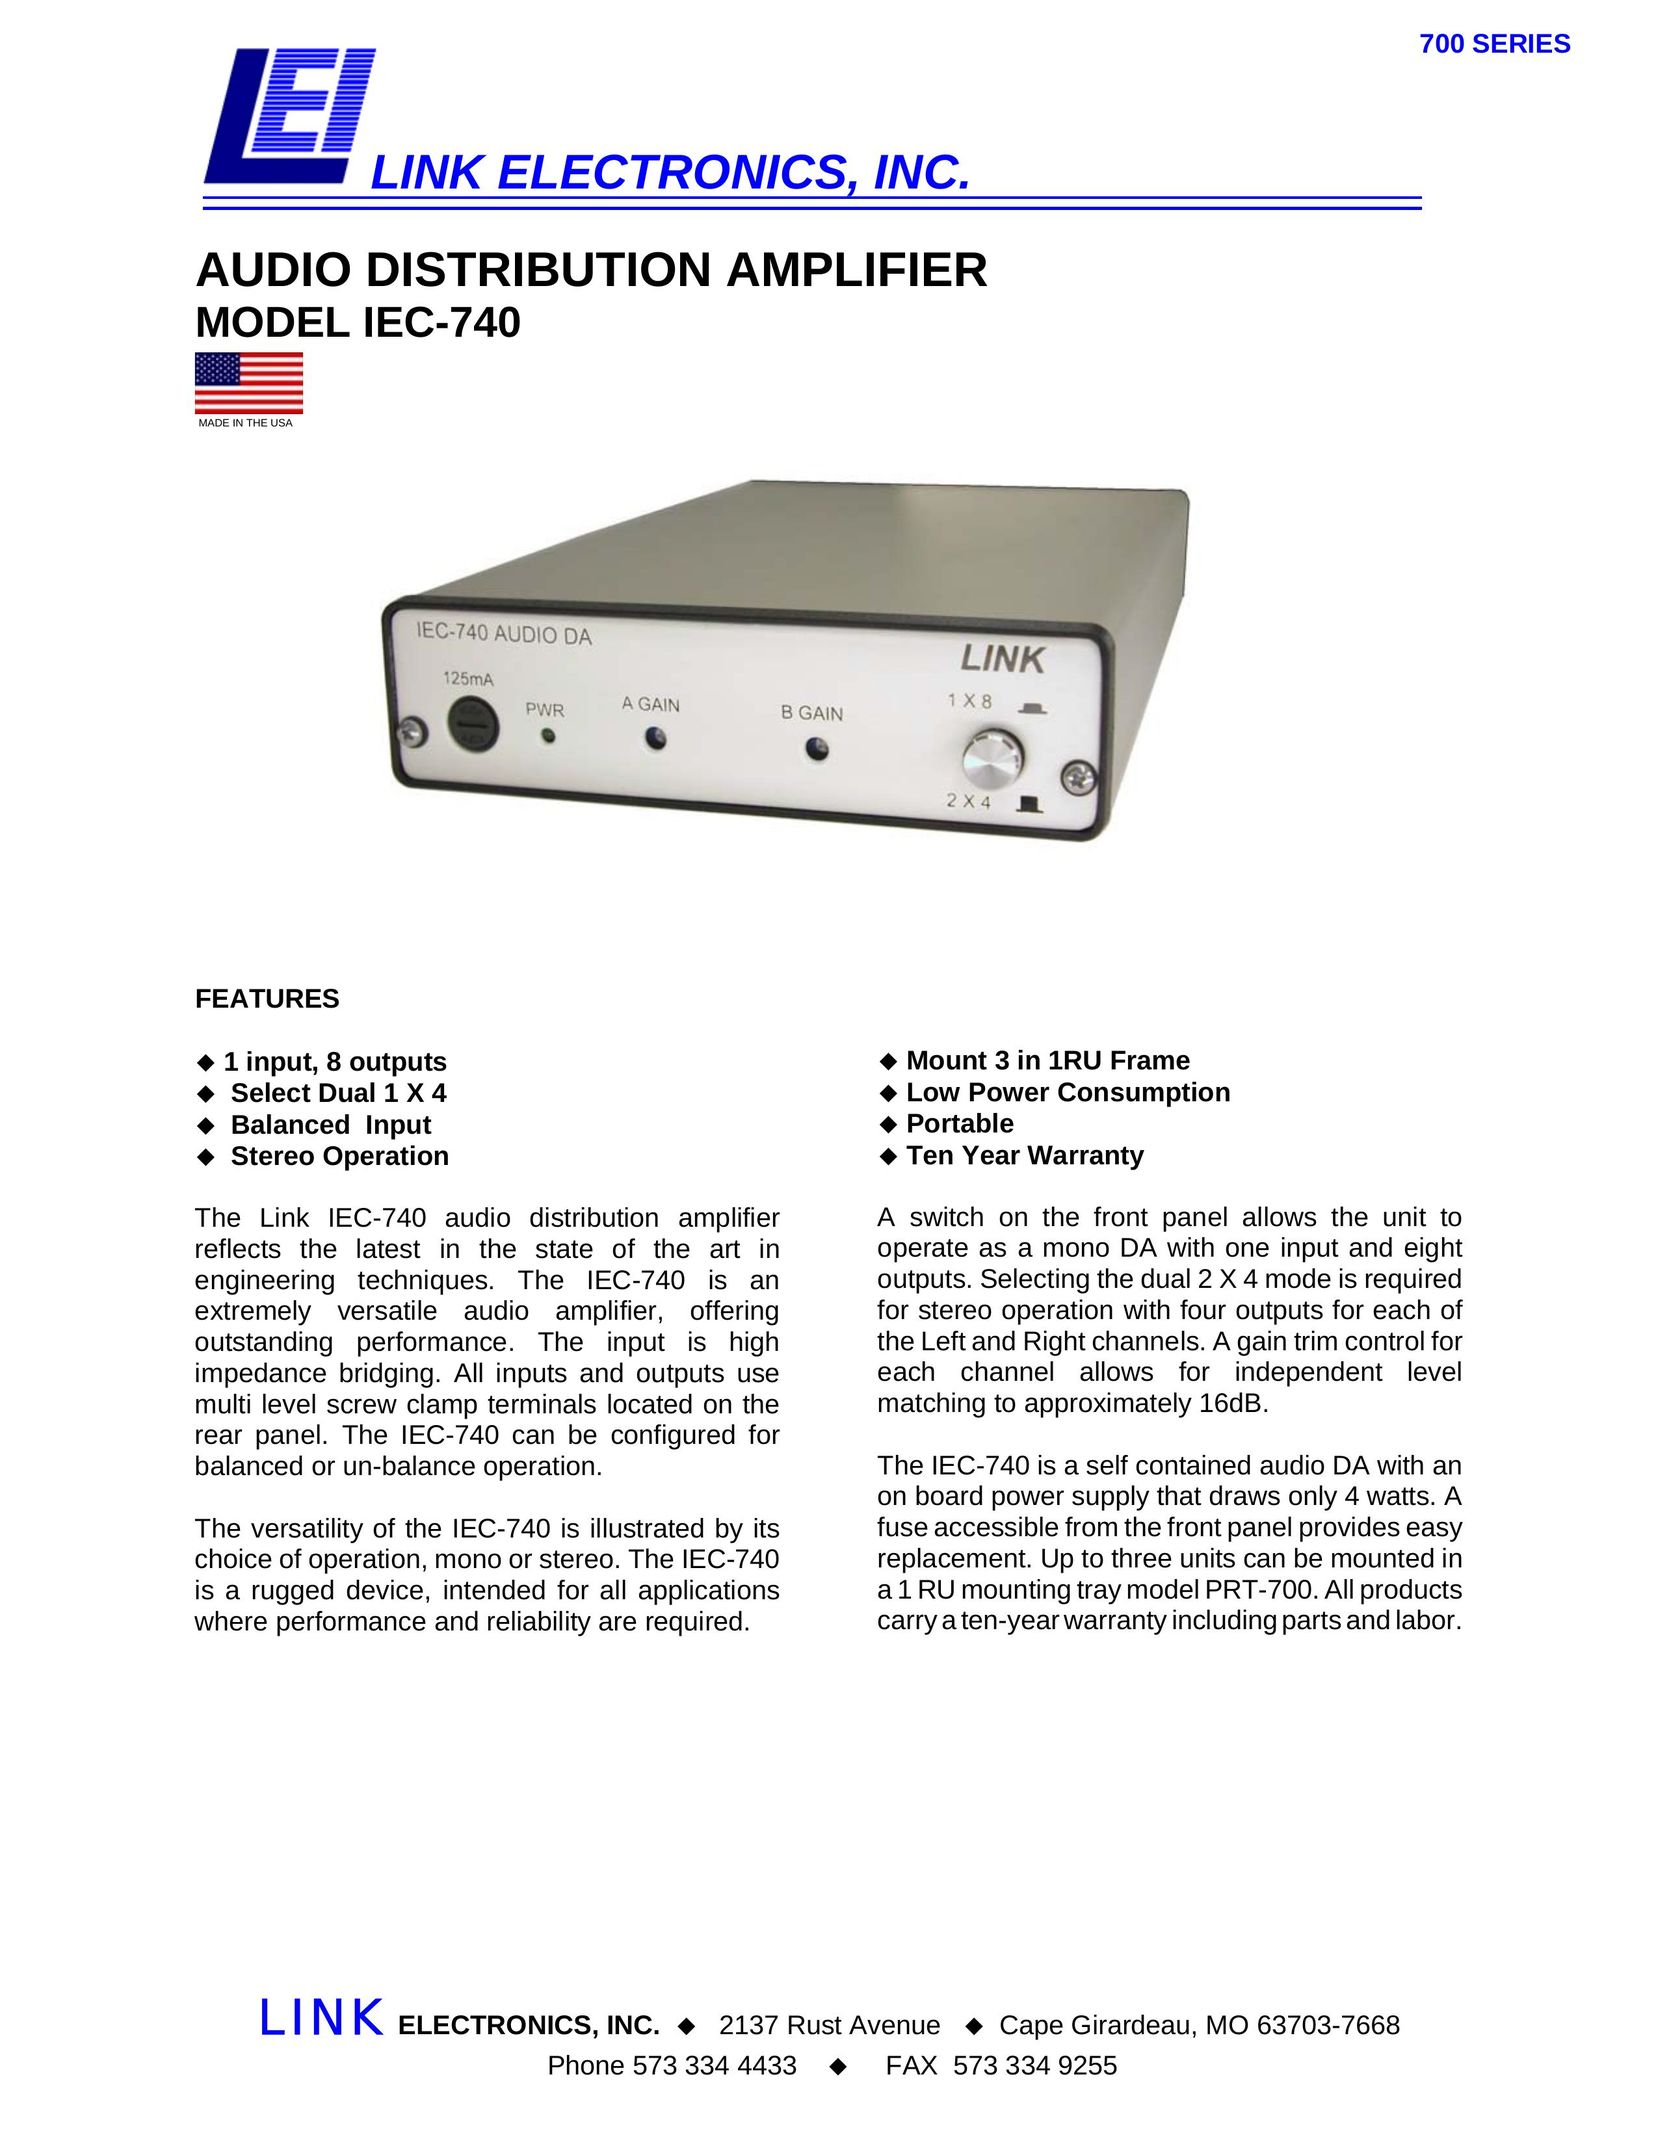 Link electronic IEC-740 Stereo Amplifier User Manual